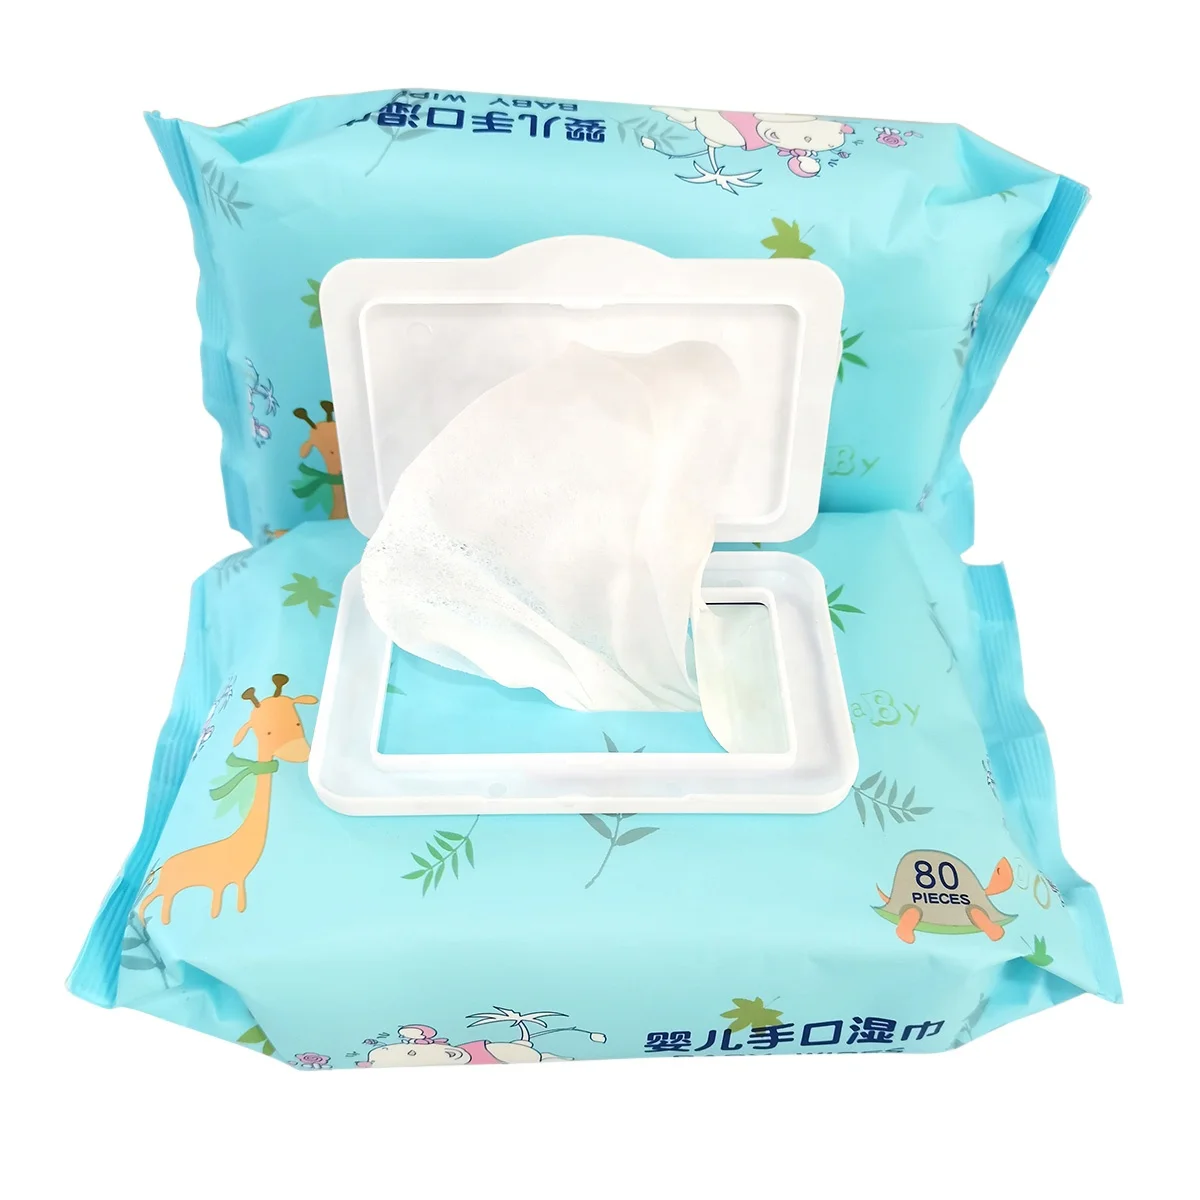 China Manufacturer soft non-woven fabric baby face cleaning wet tissue wipes